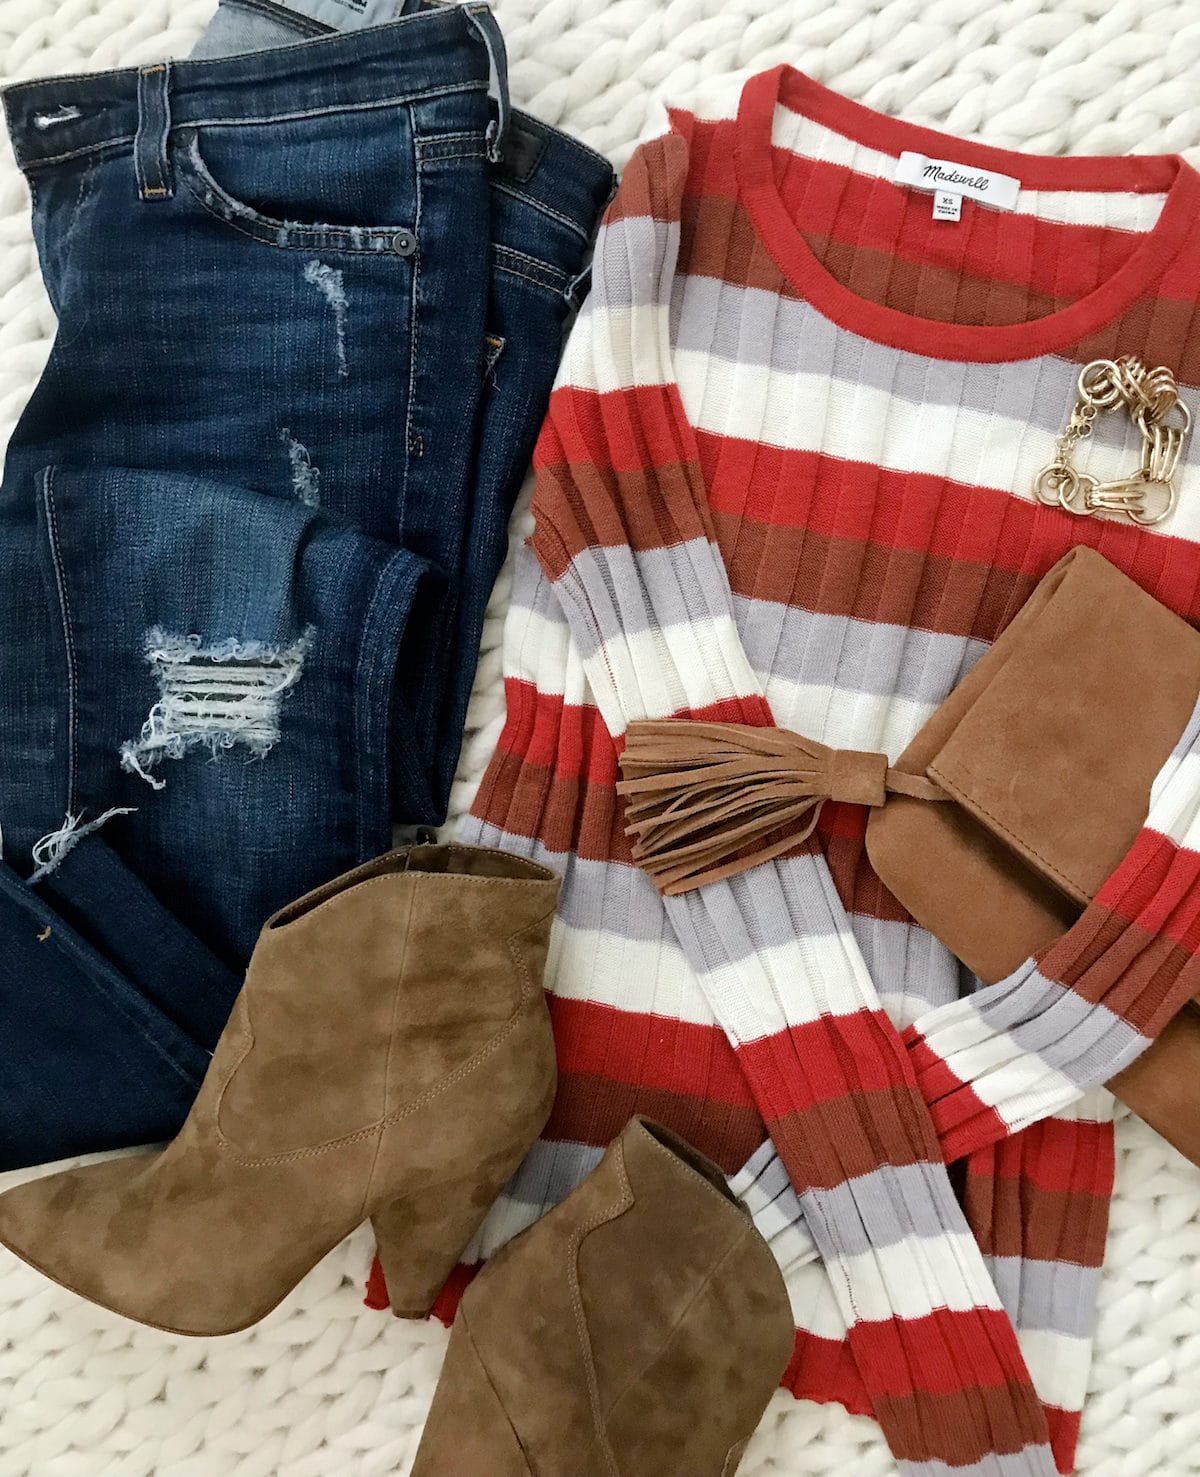 https://eb2pgoq5kpf.exactdn.com/wp-content/uploads/2018/09/Cute-Fall-Outfit-jeans-and-striped-sweater-1200x1477.jpg?strip=all&lossy=1&ssl=1